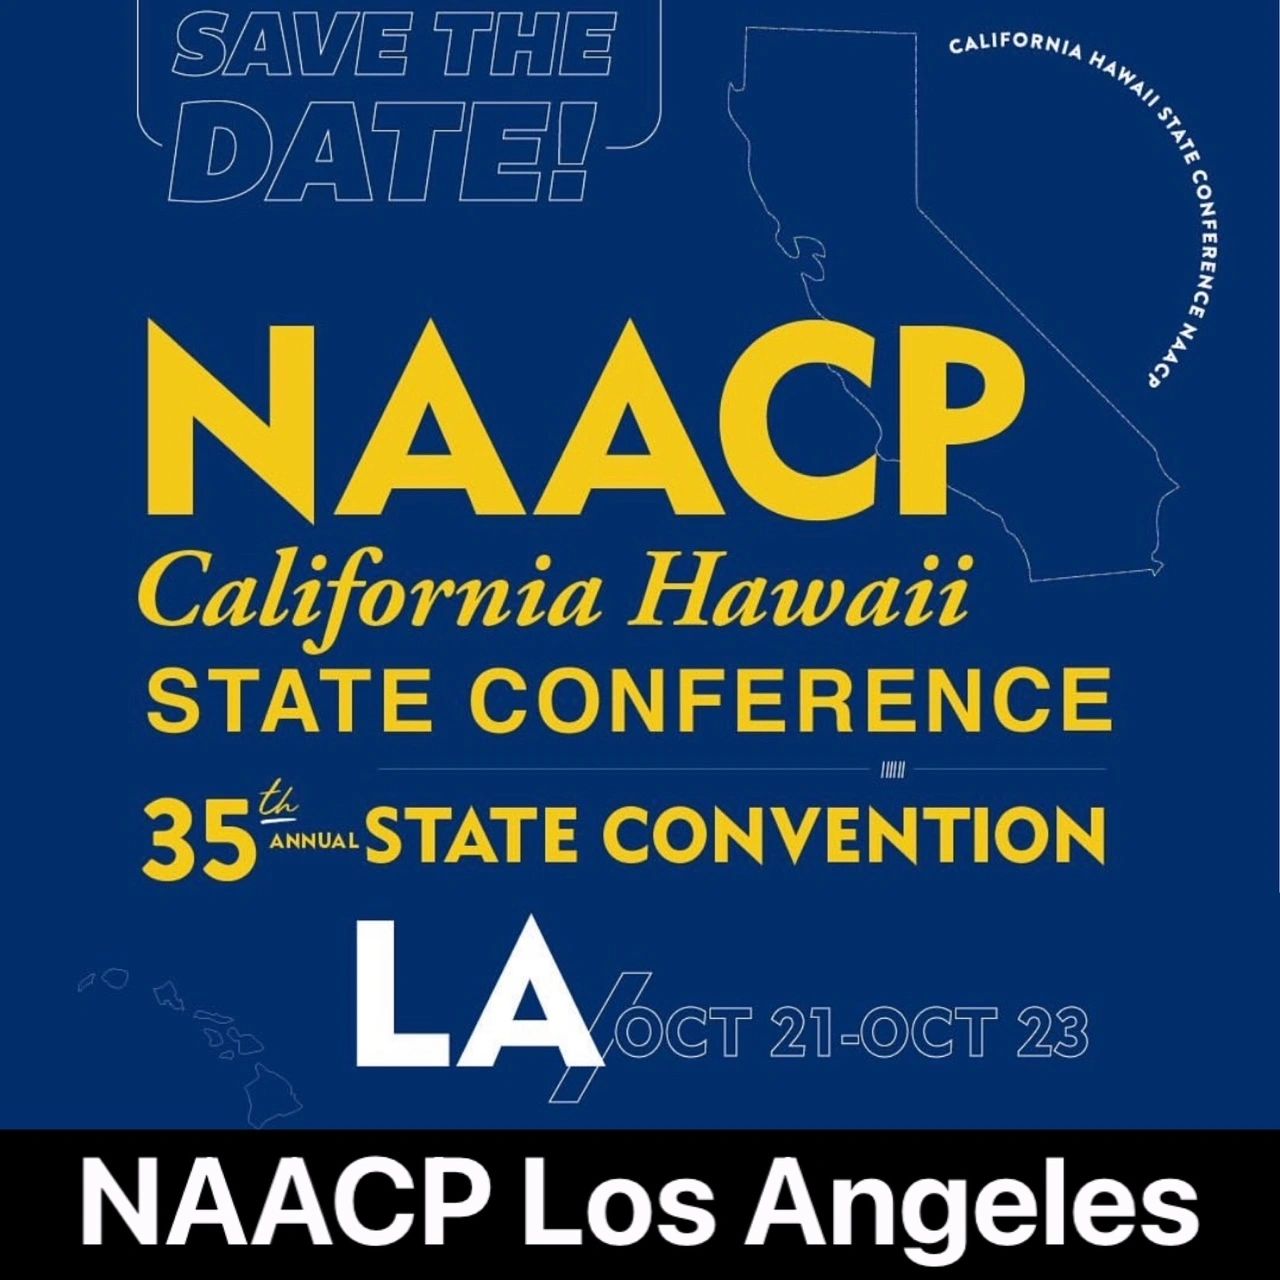 SAVE THE DATE CA/HI NAACP STATE CONVENTION